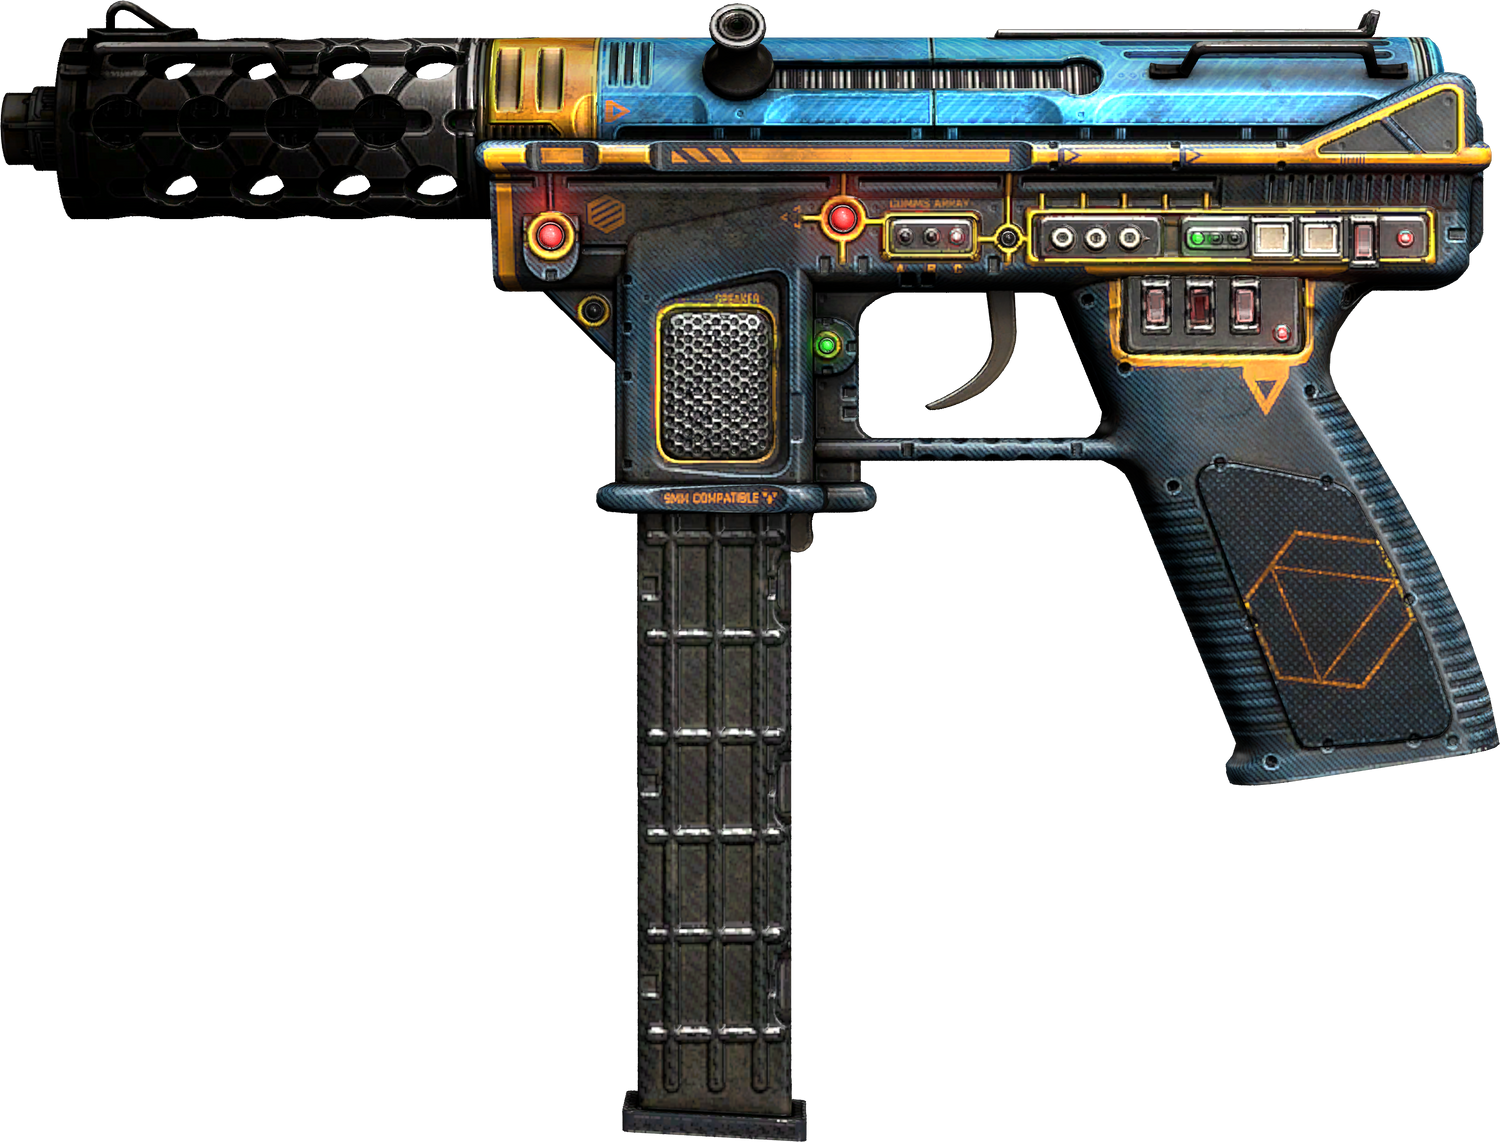 download the last version for windows Tec-9 Re-Entry cs go skin